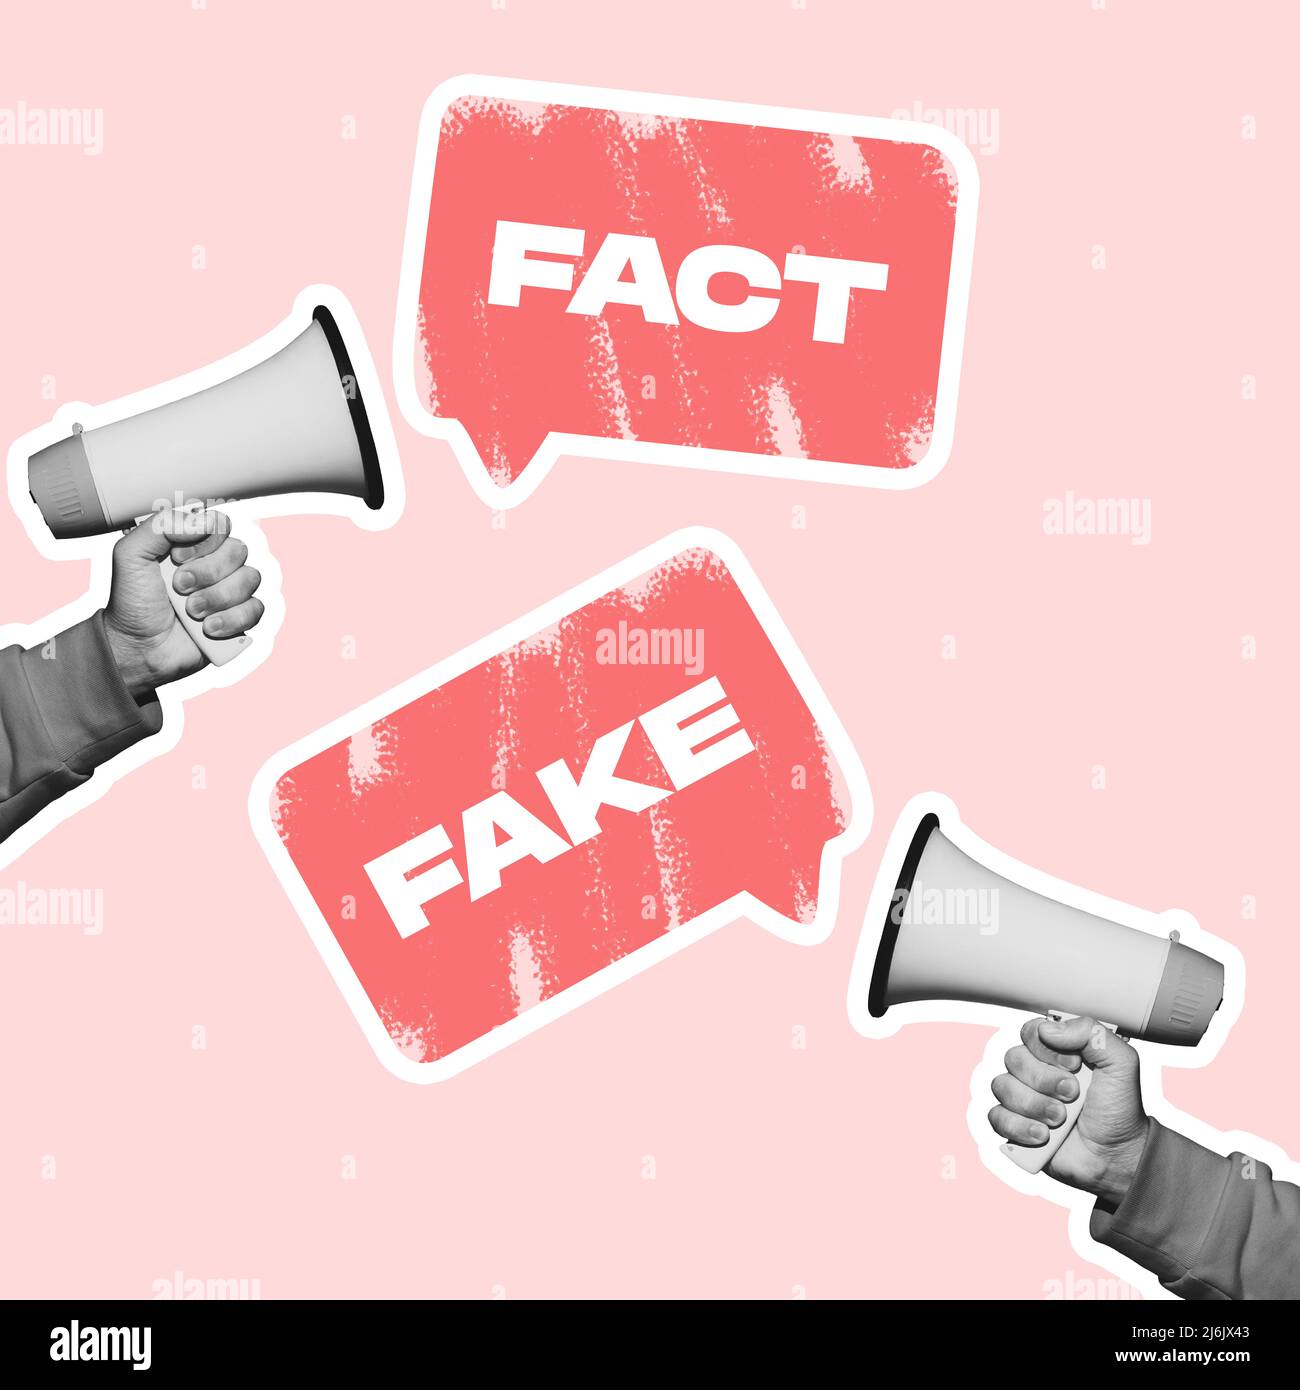 Contemporary Art Collage Human Hands Holding Megaphones And Spreading Fake News Messages 5431